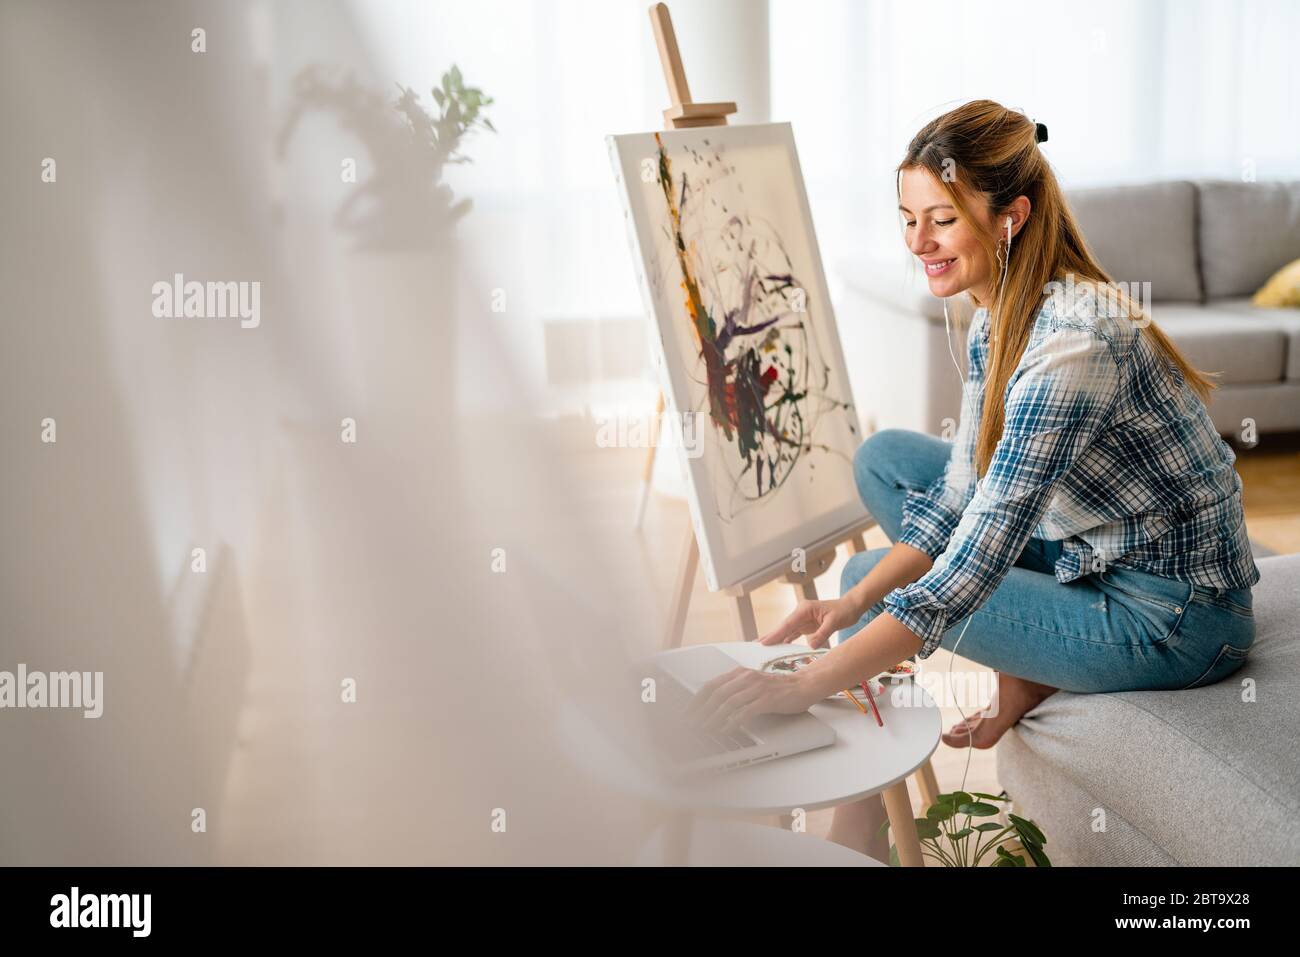 Art, creativity, hobby, job and creative occupation concept. Woman painting at home. Stock Photo